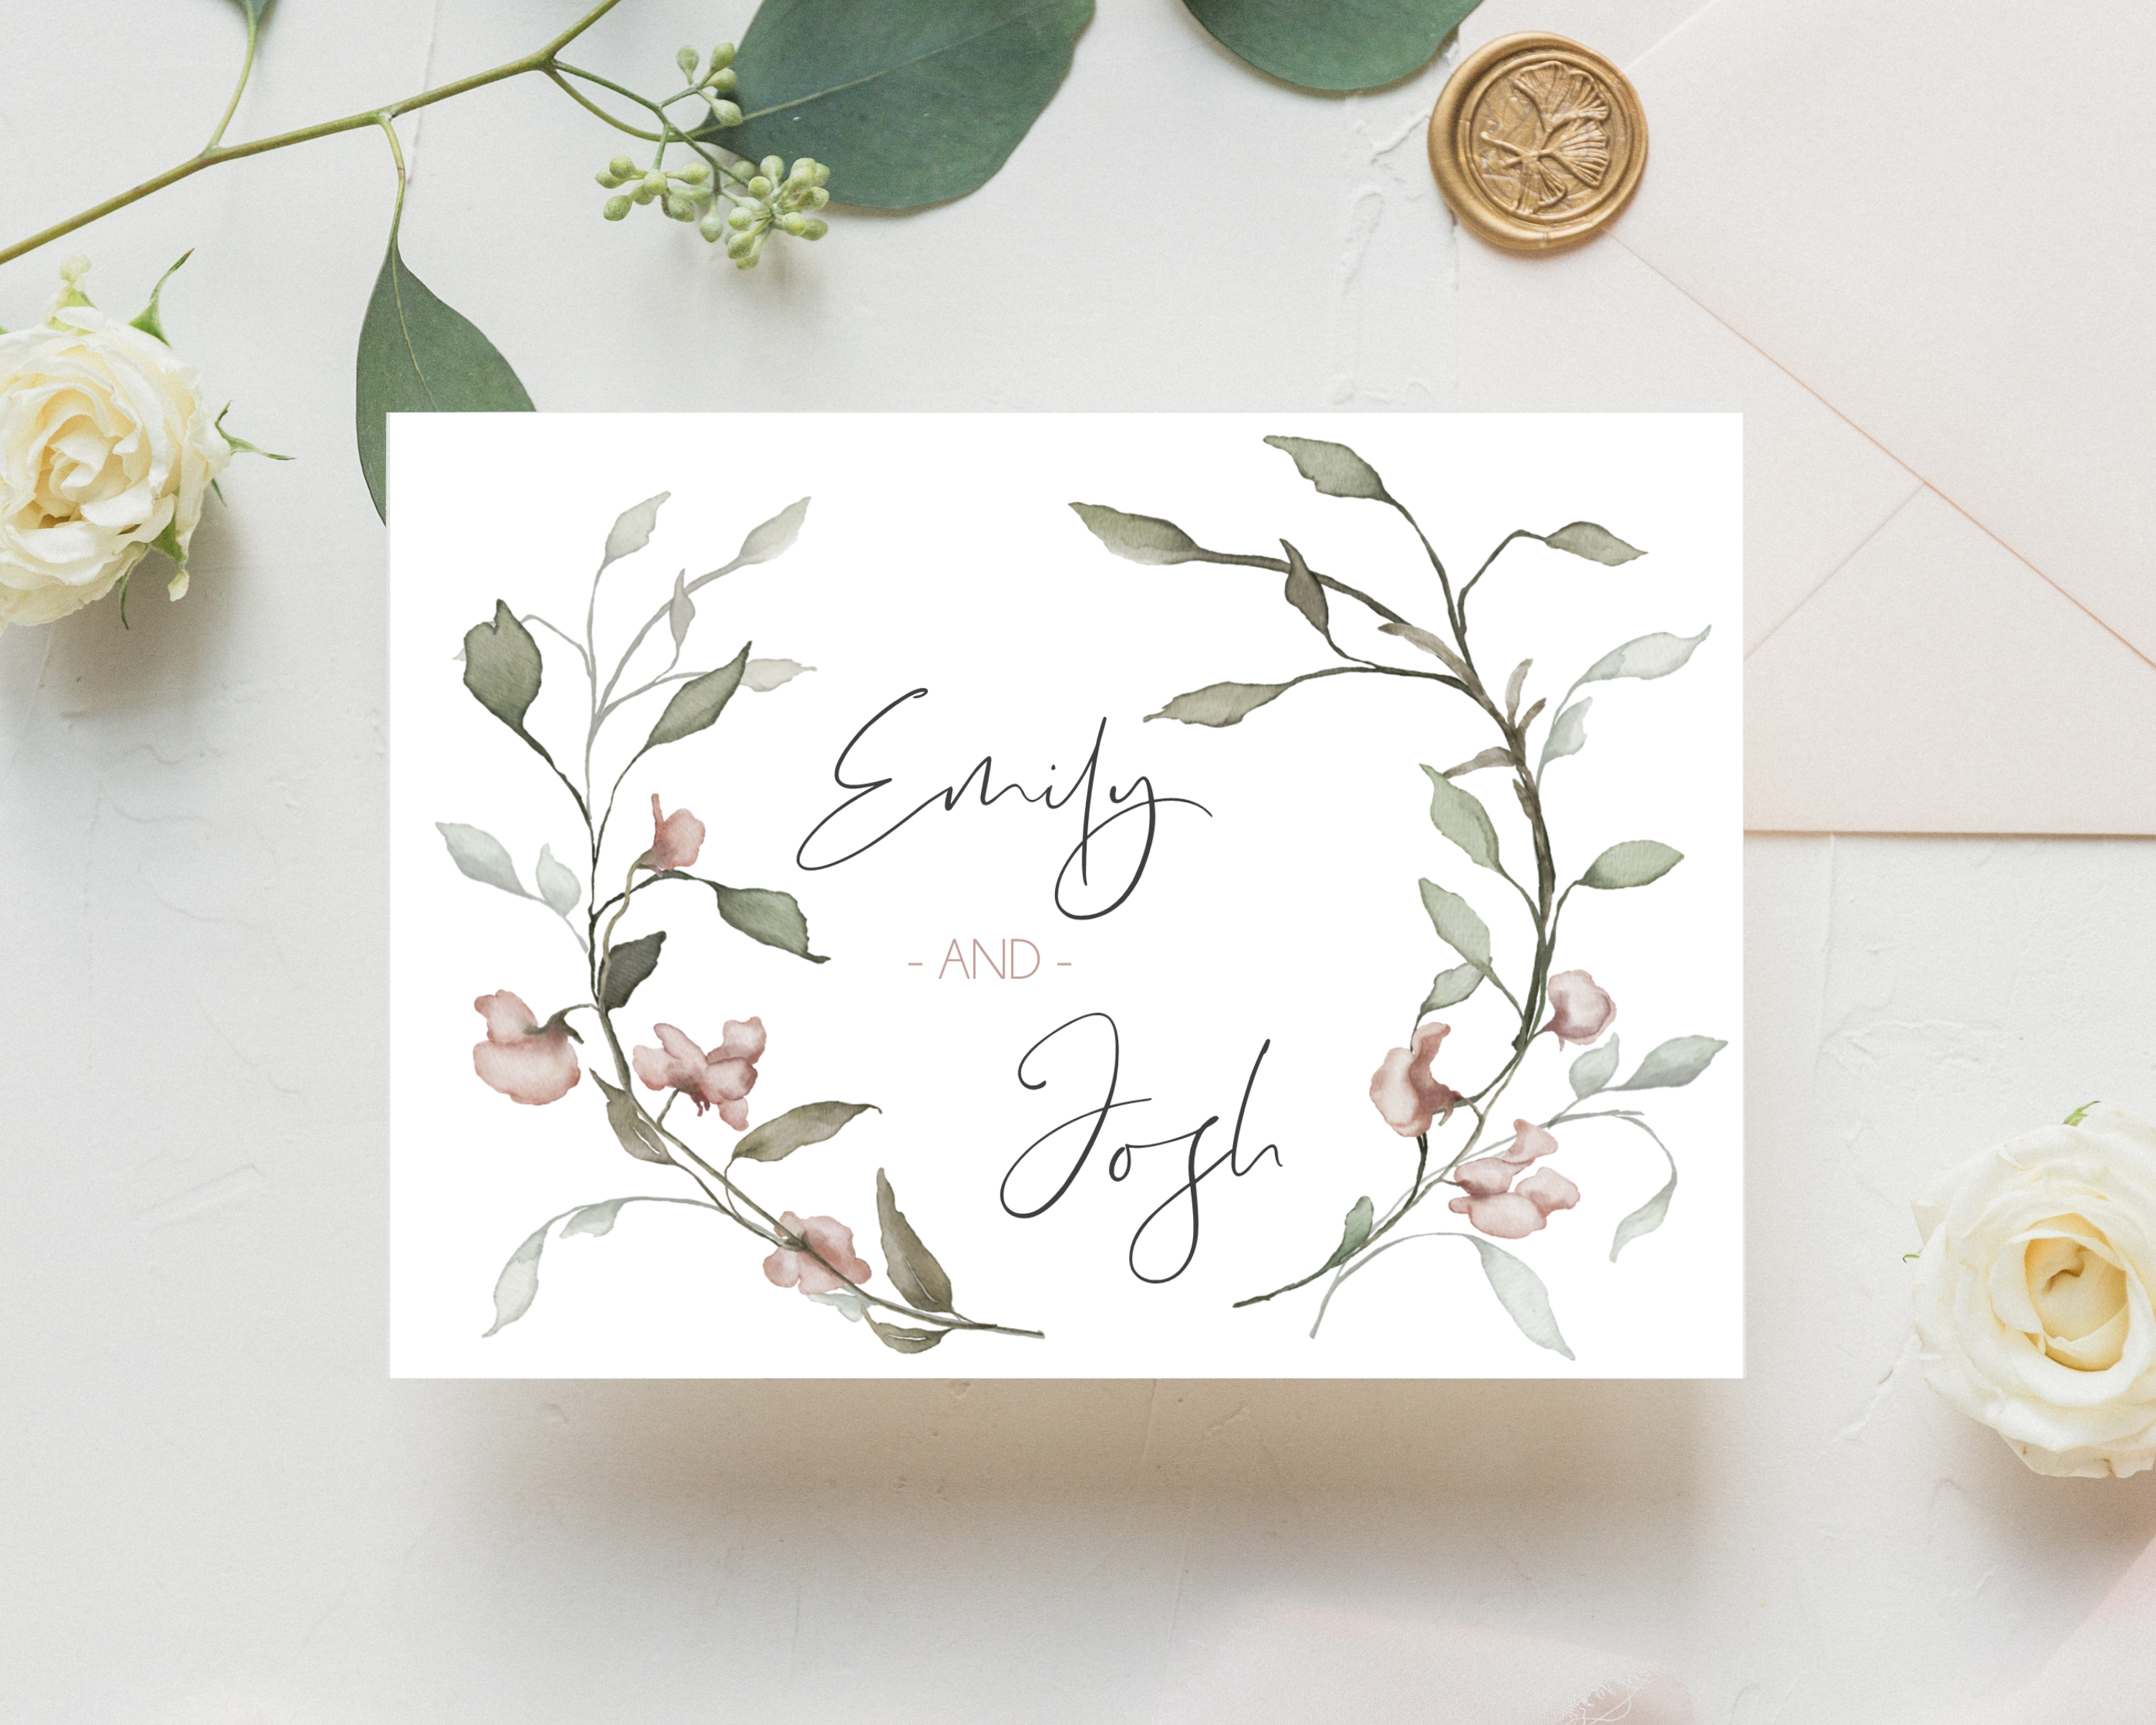 Watercolour Pink Flowers A6 Poppleberry accordion fold all-in-one wedding invitation, folded on eucalyptus leaves.